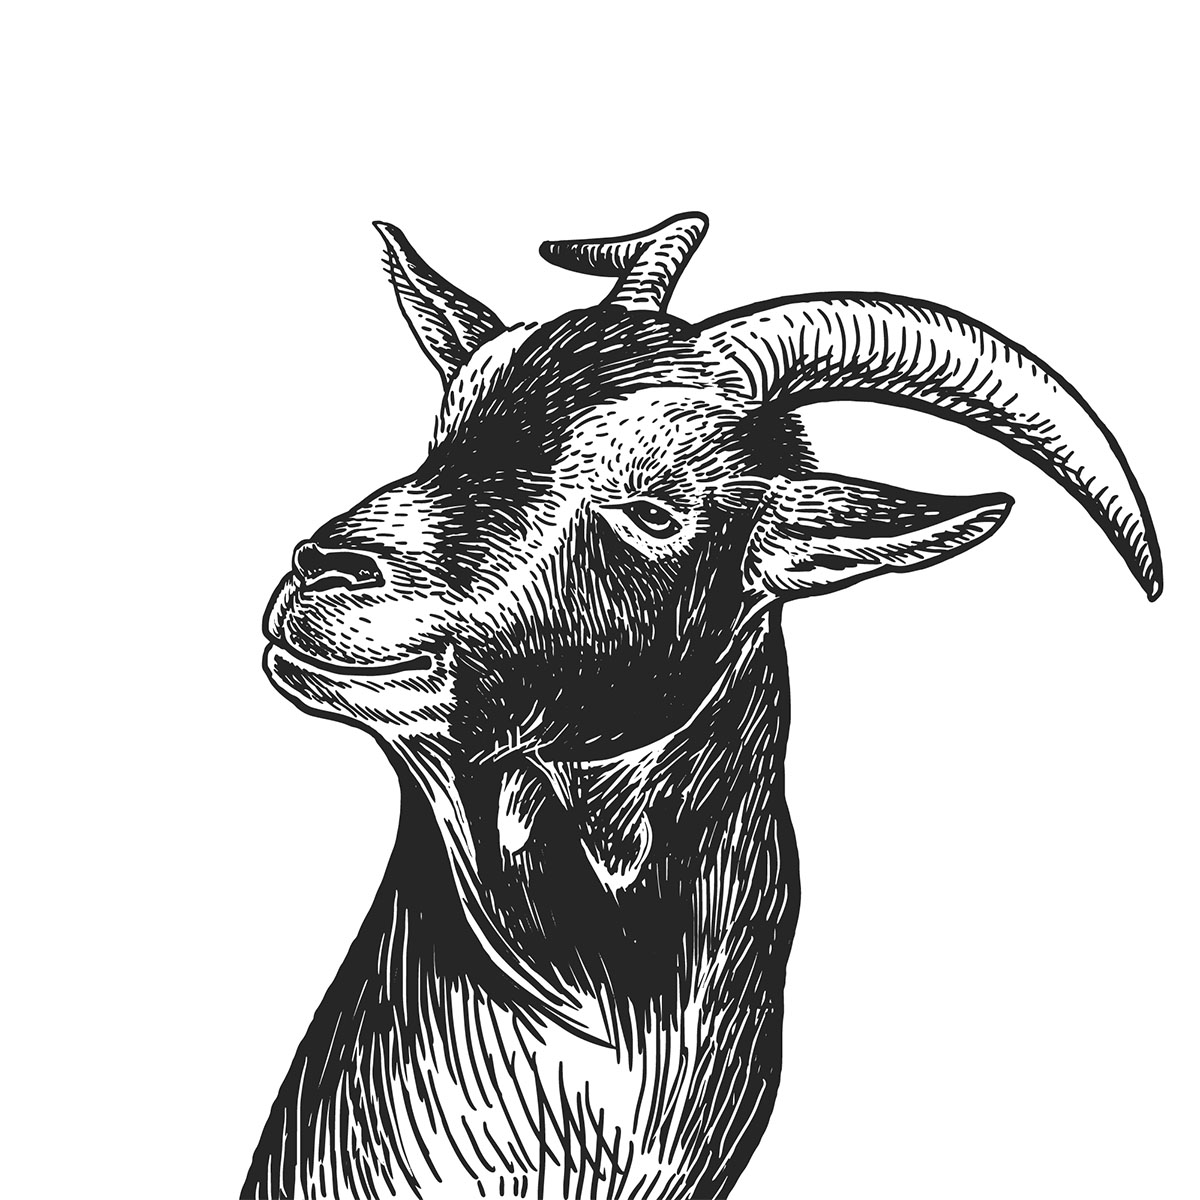 An illustration of a goat